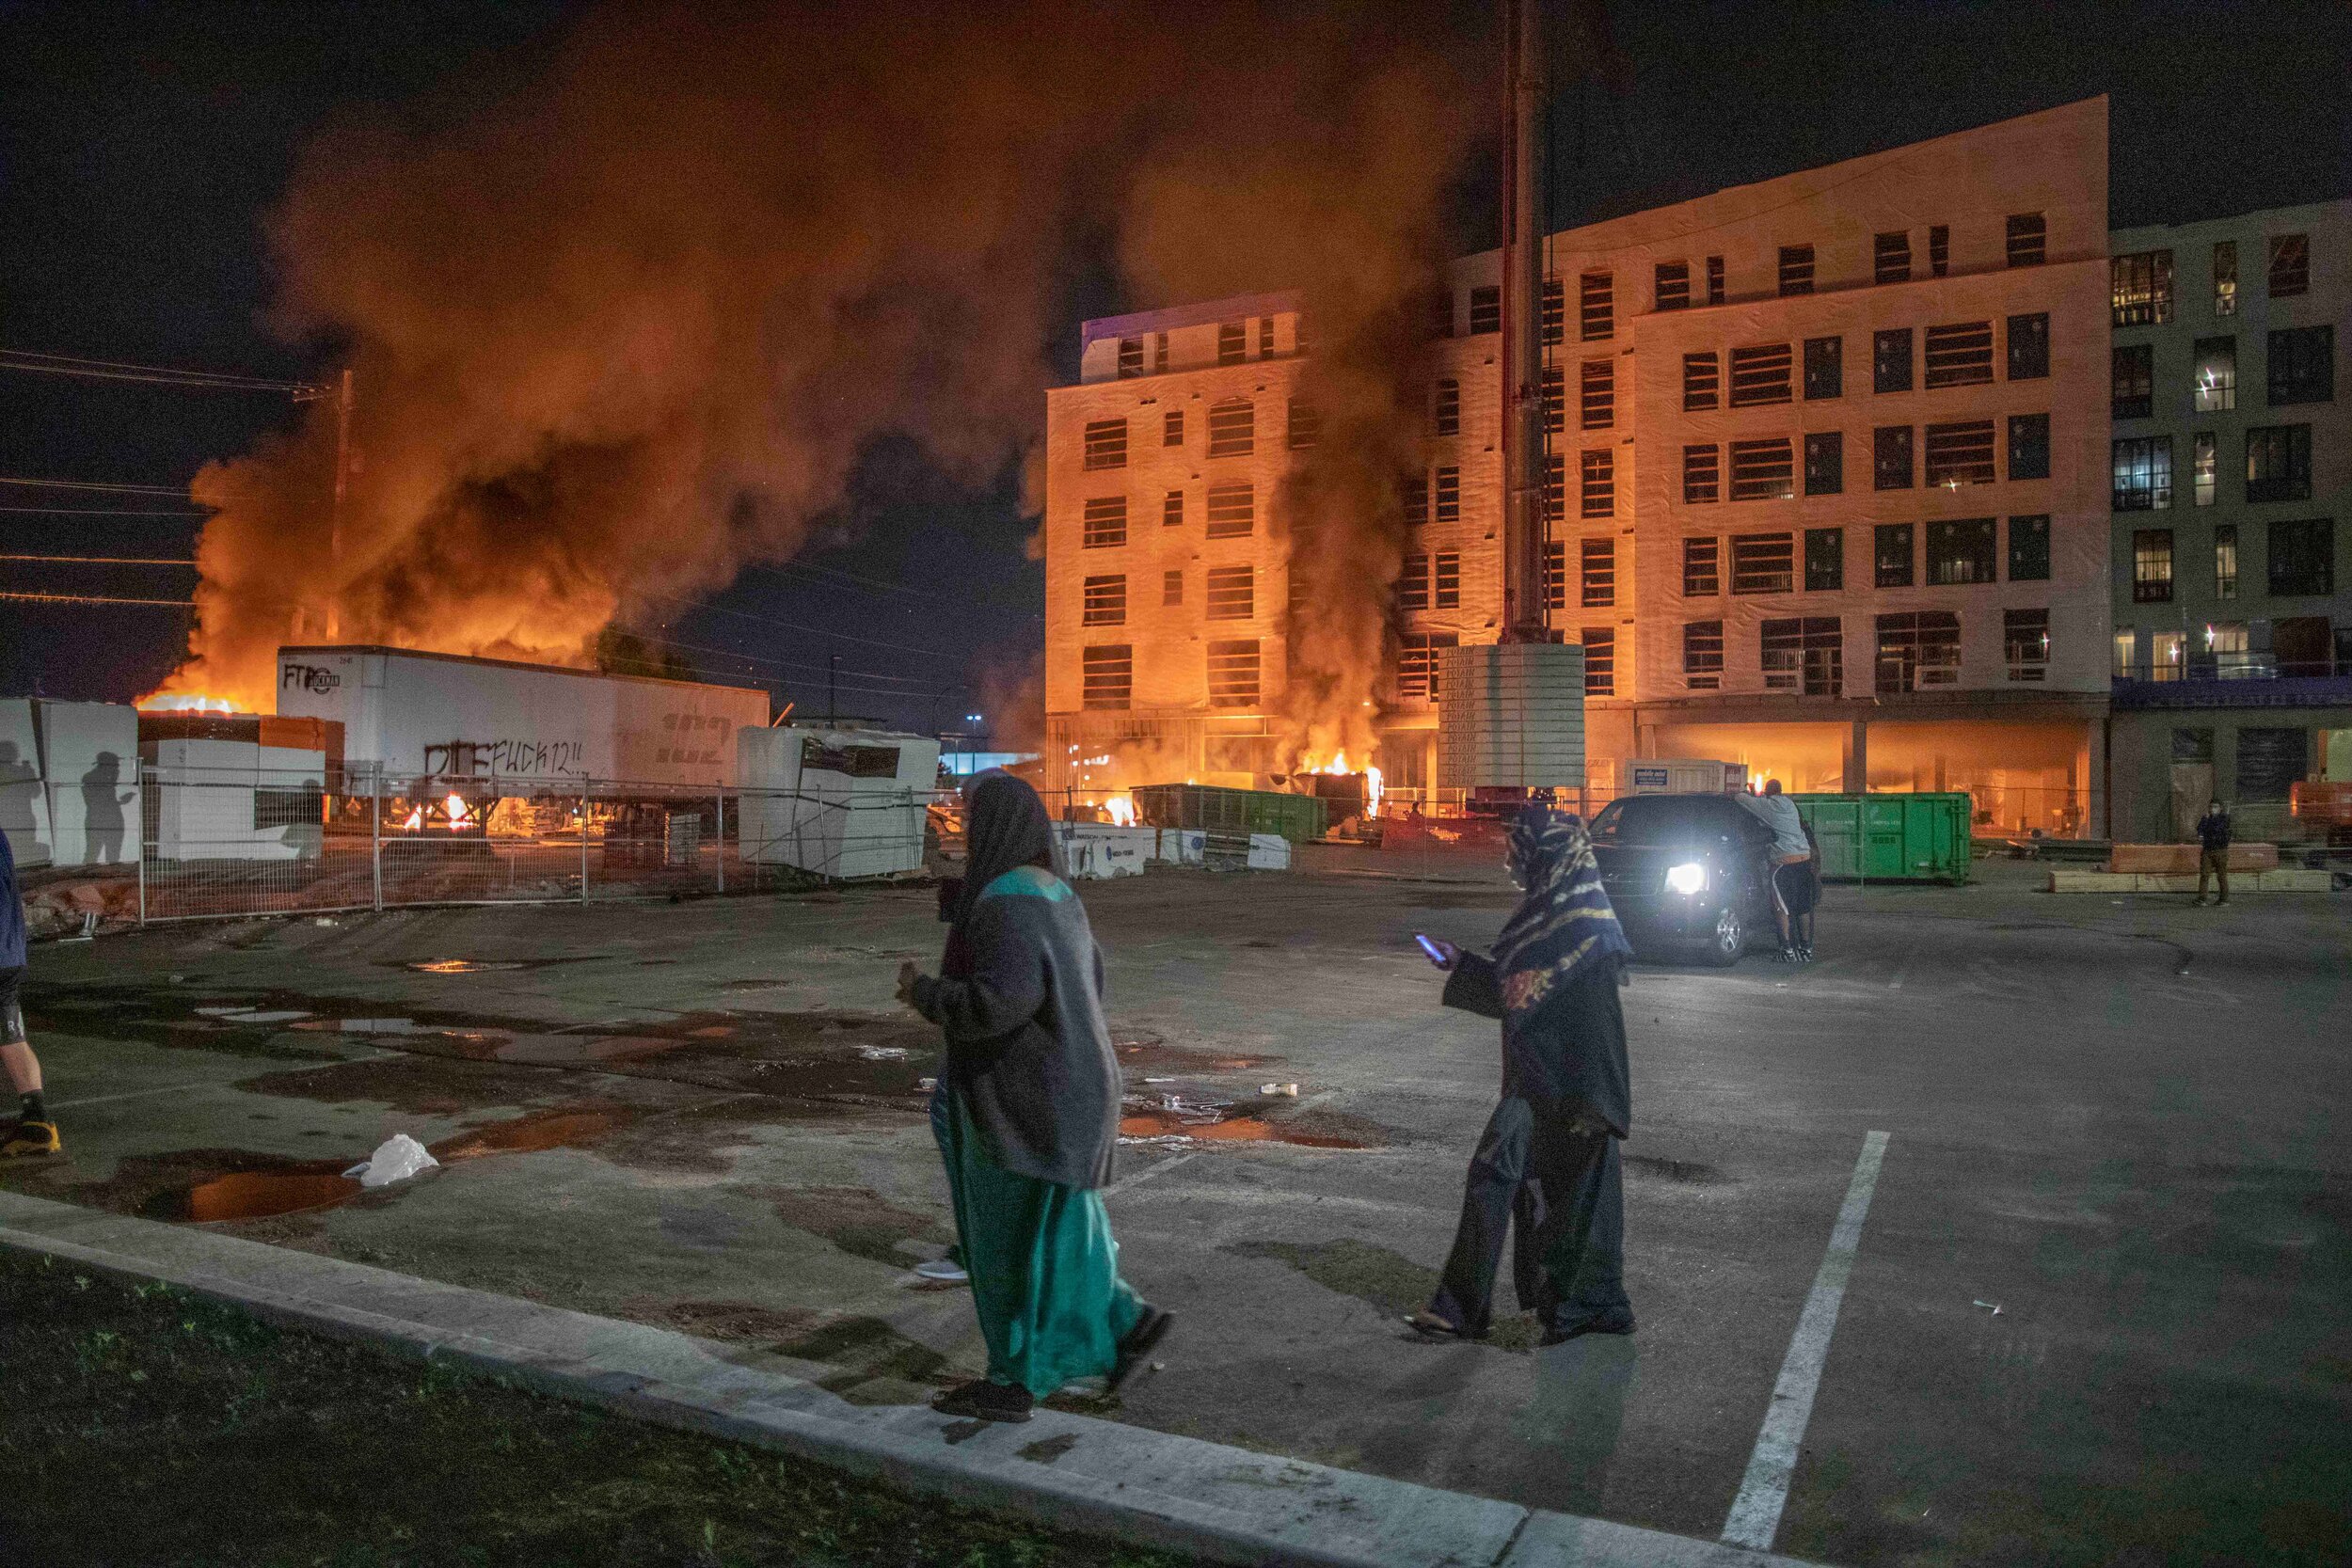  Women walk across the parking lot of what was supposed to be a 190 unit affordable housing in Minneapolis, Minnesota on May 27. The construction site was set on fire during a riot over the police killing of George Floyd.  The building was a complete